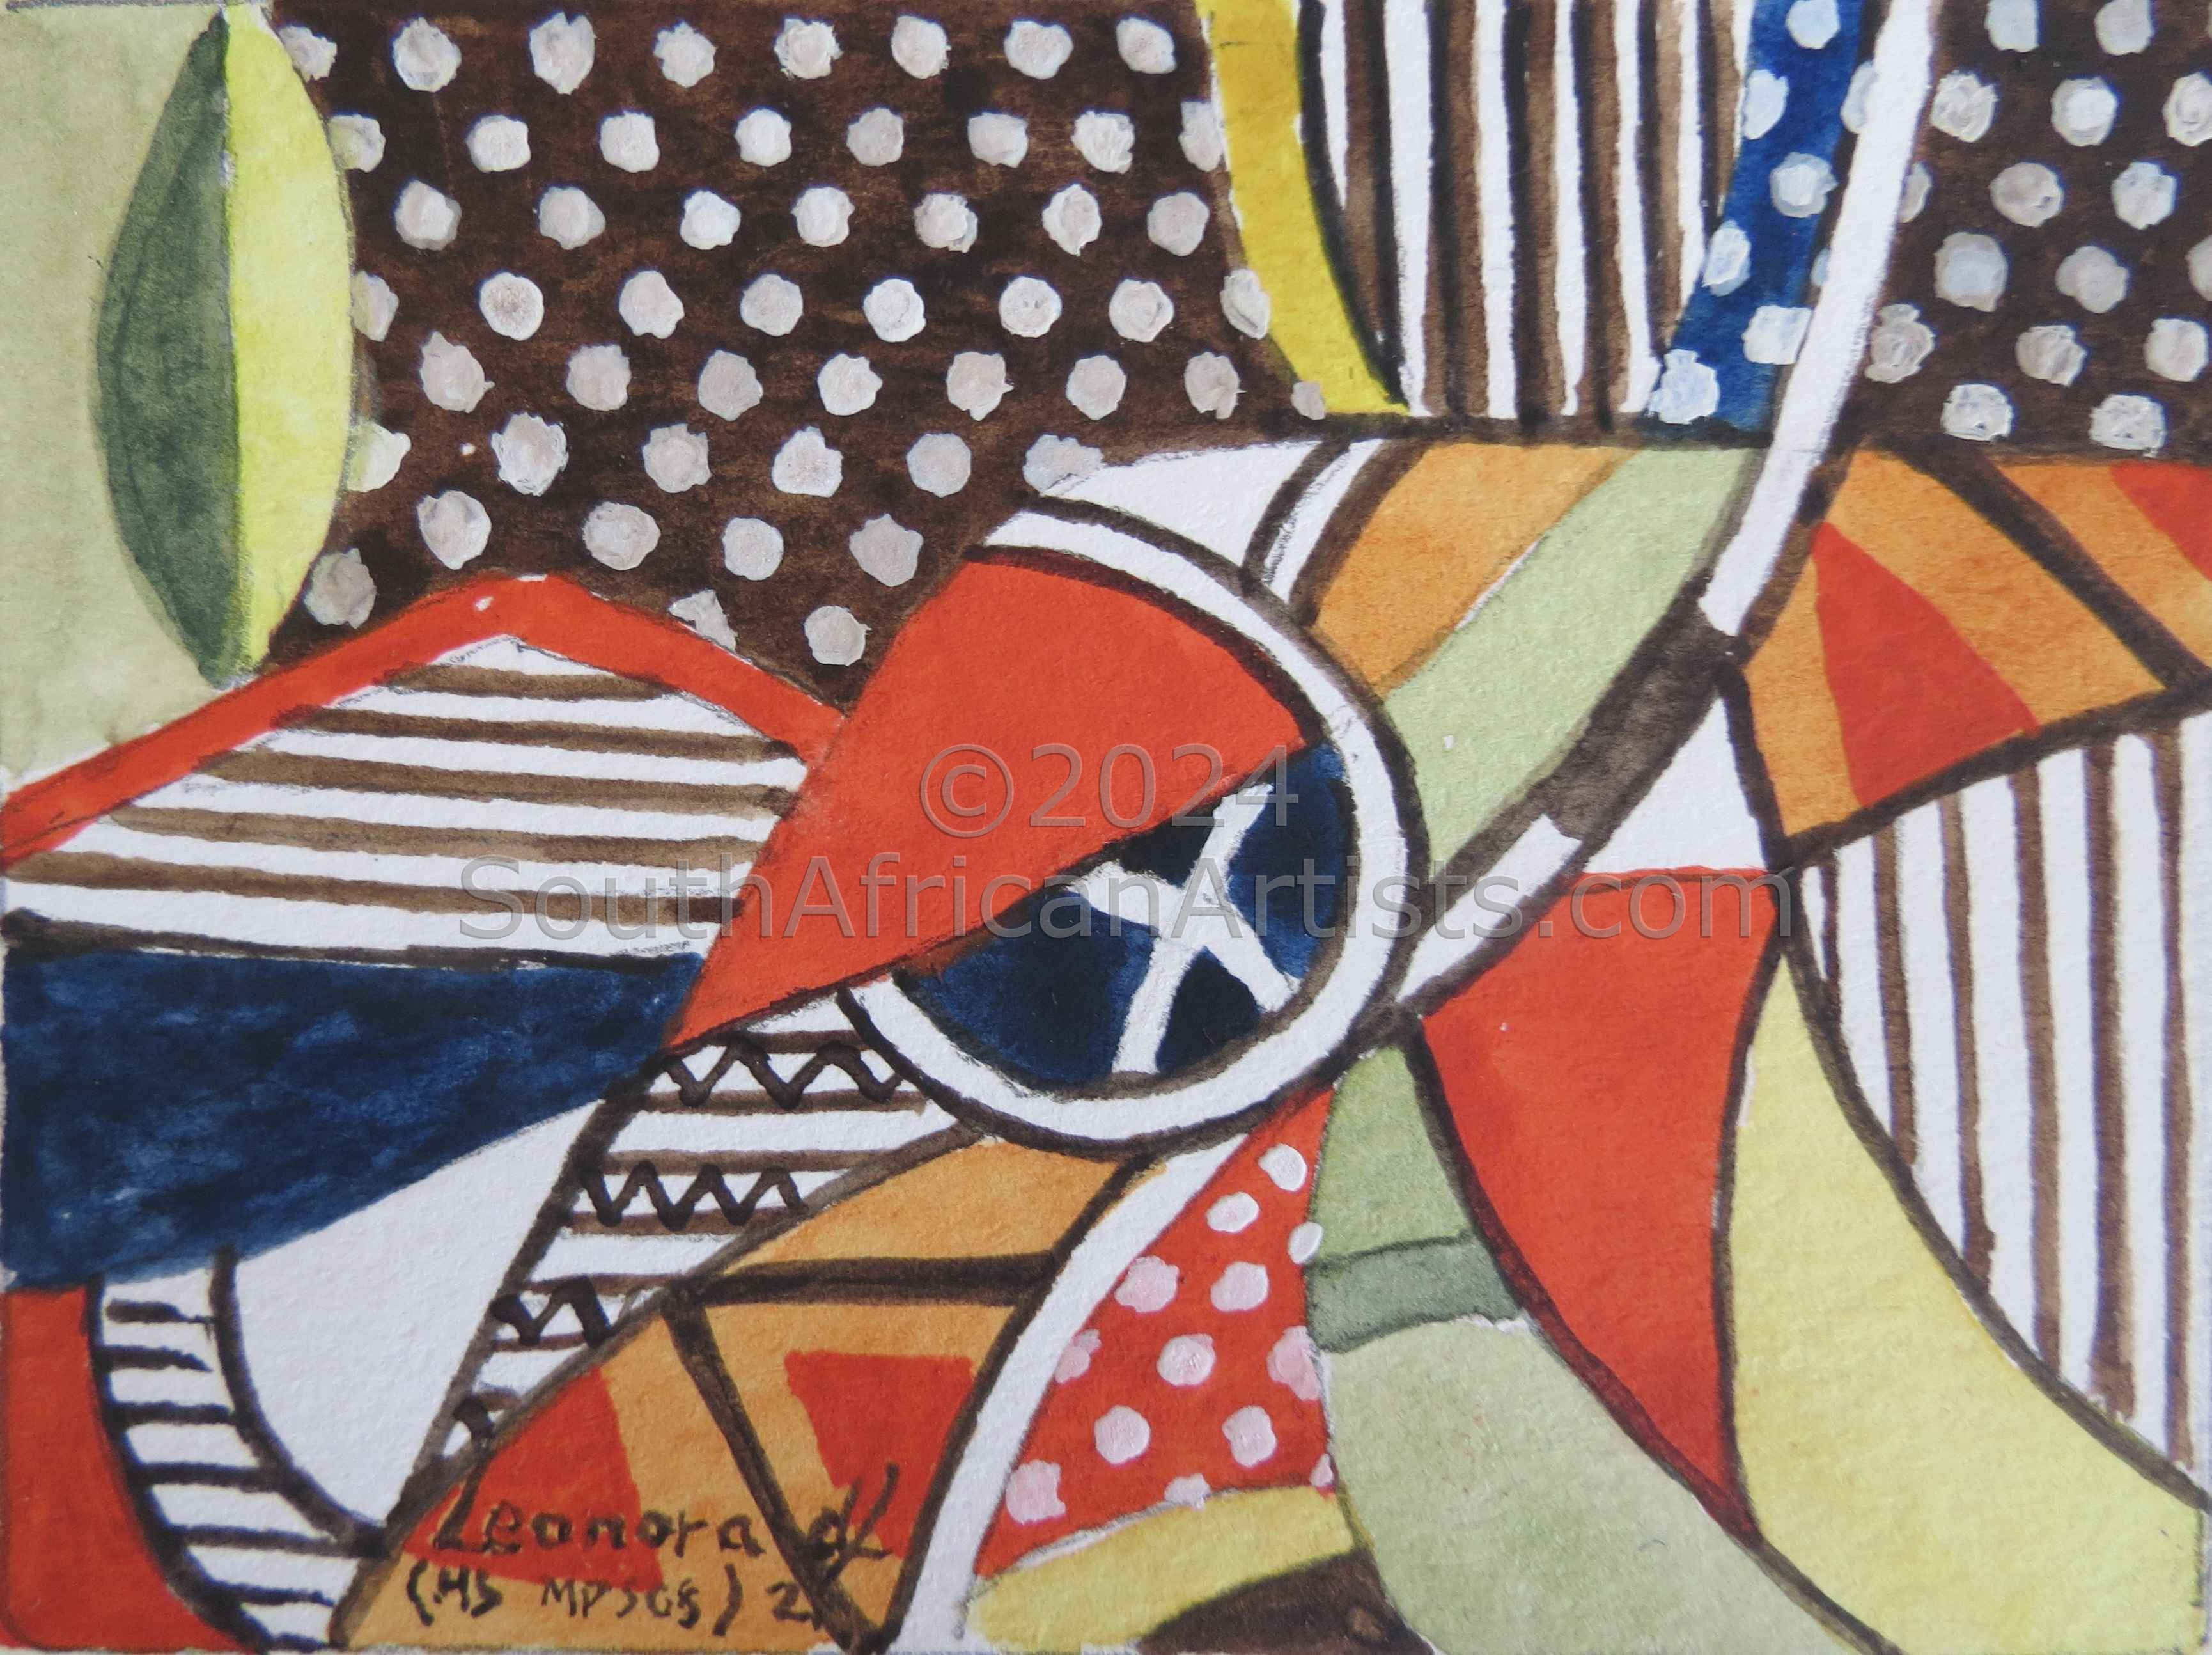 MINIATURE- African abstract 1